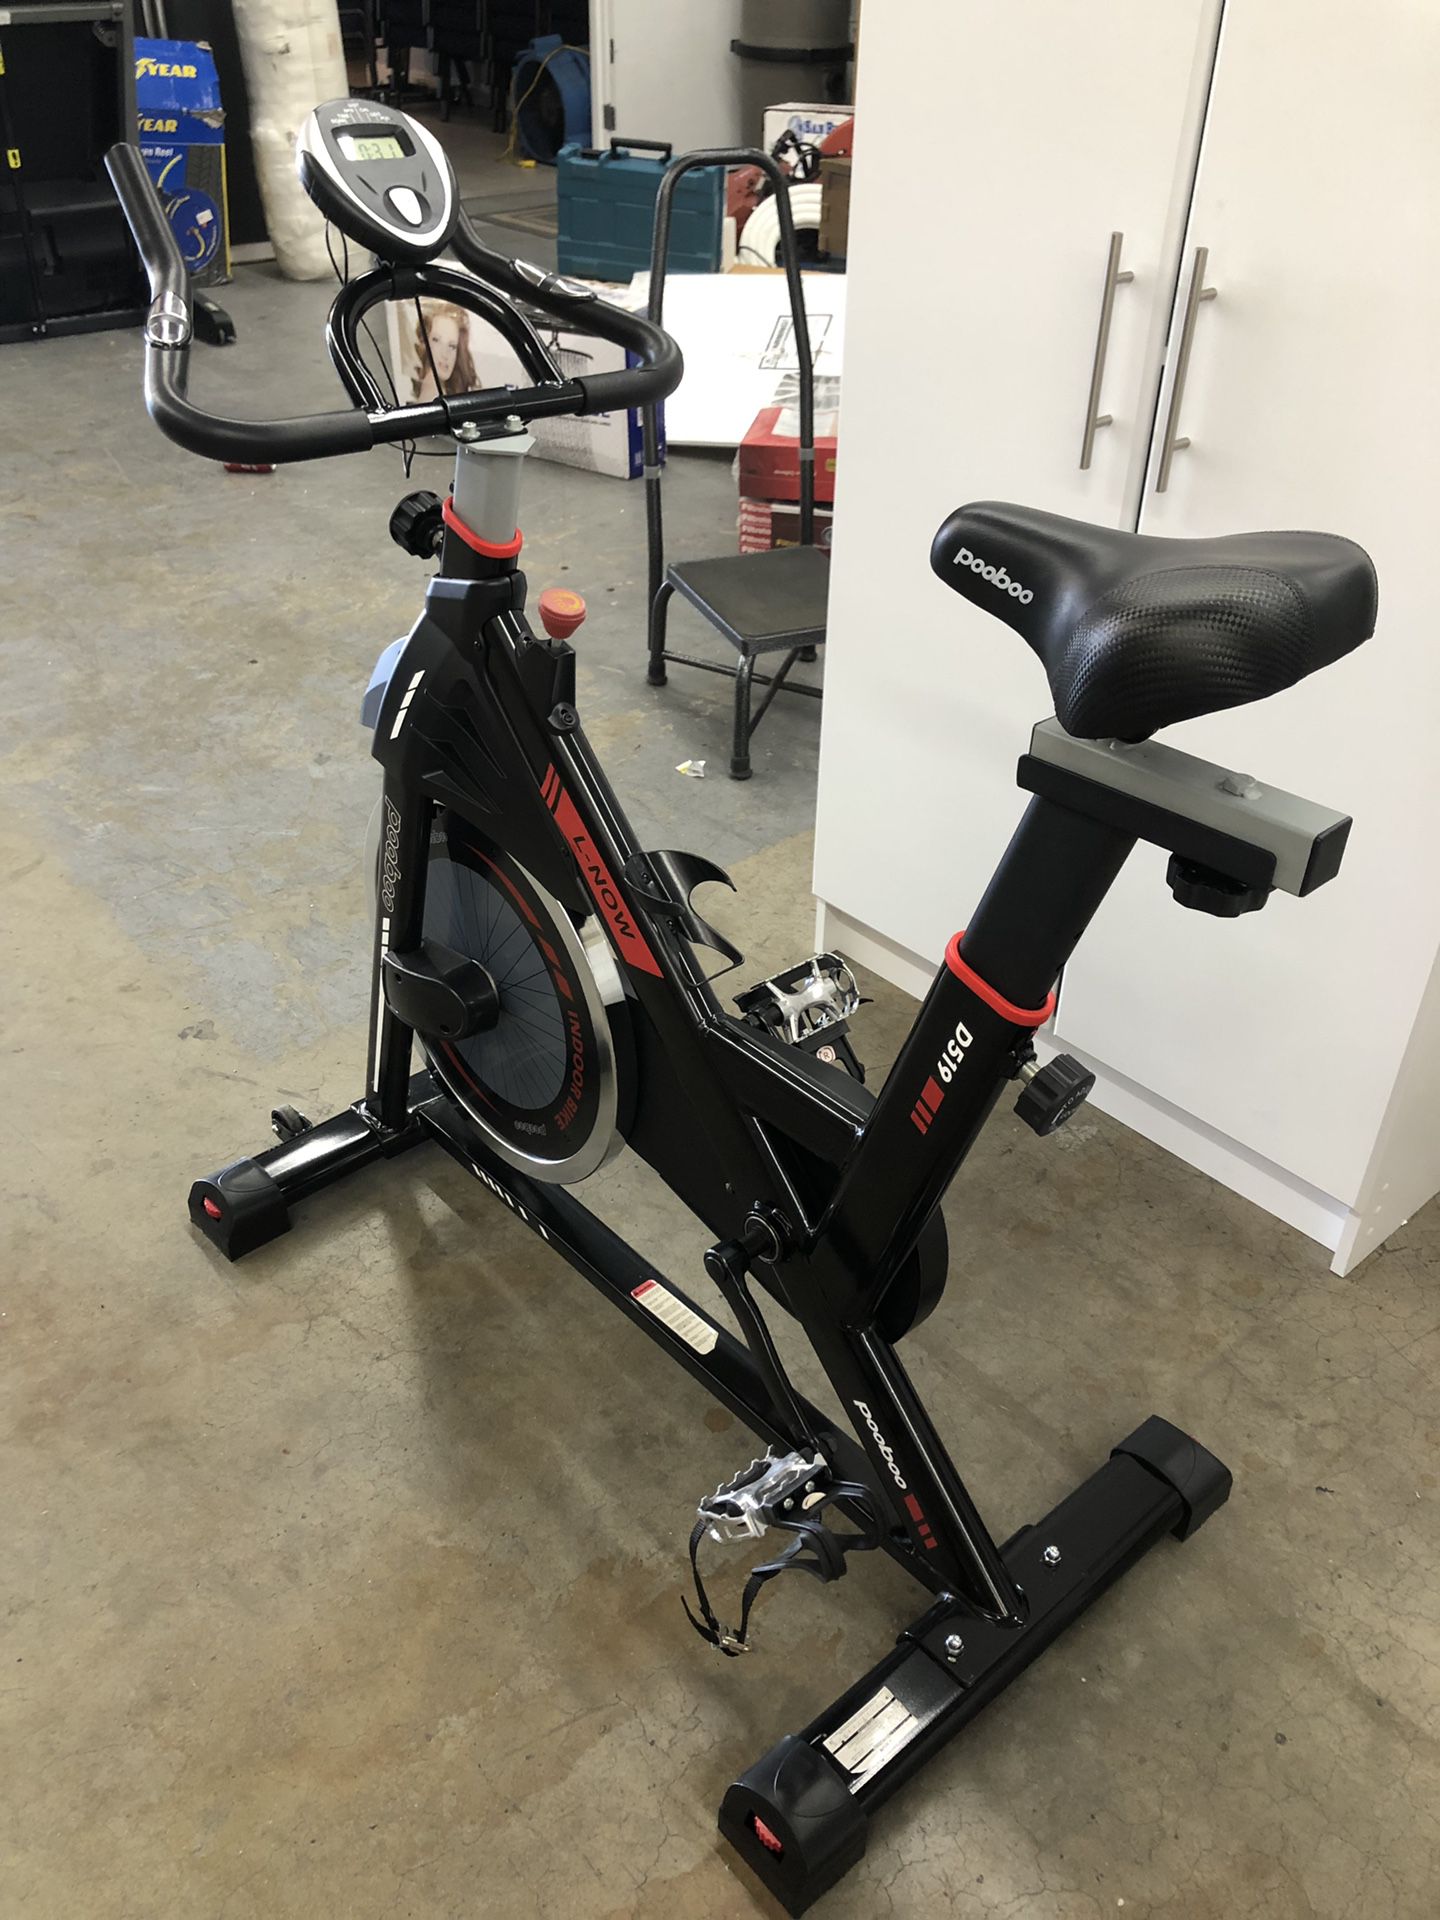 L NOW Indoor Cycling Bike Stationary Exercise Bike Quiet and Smooth with Tablet Holder (D600) retail $286